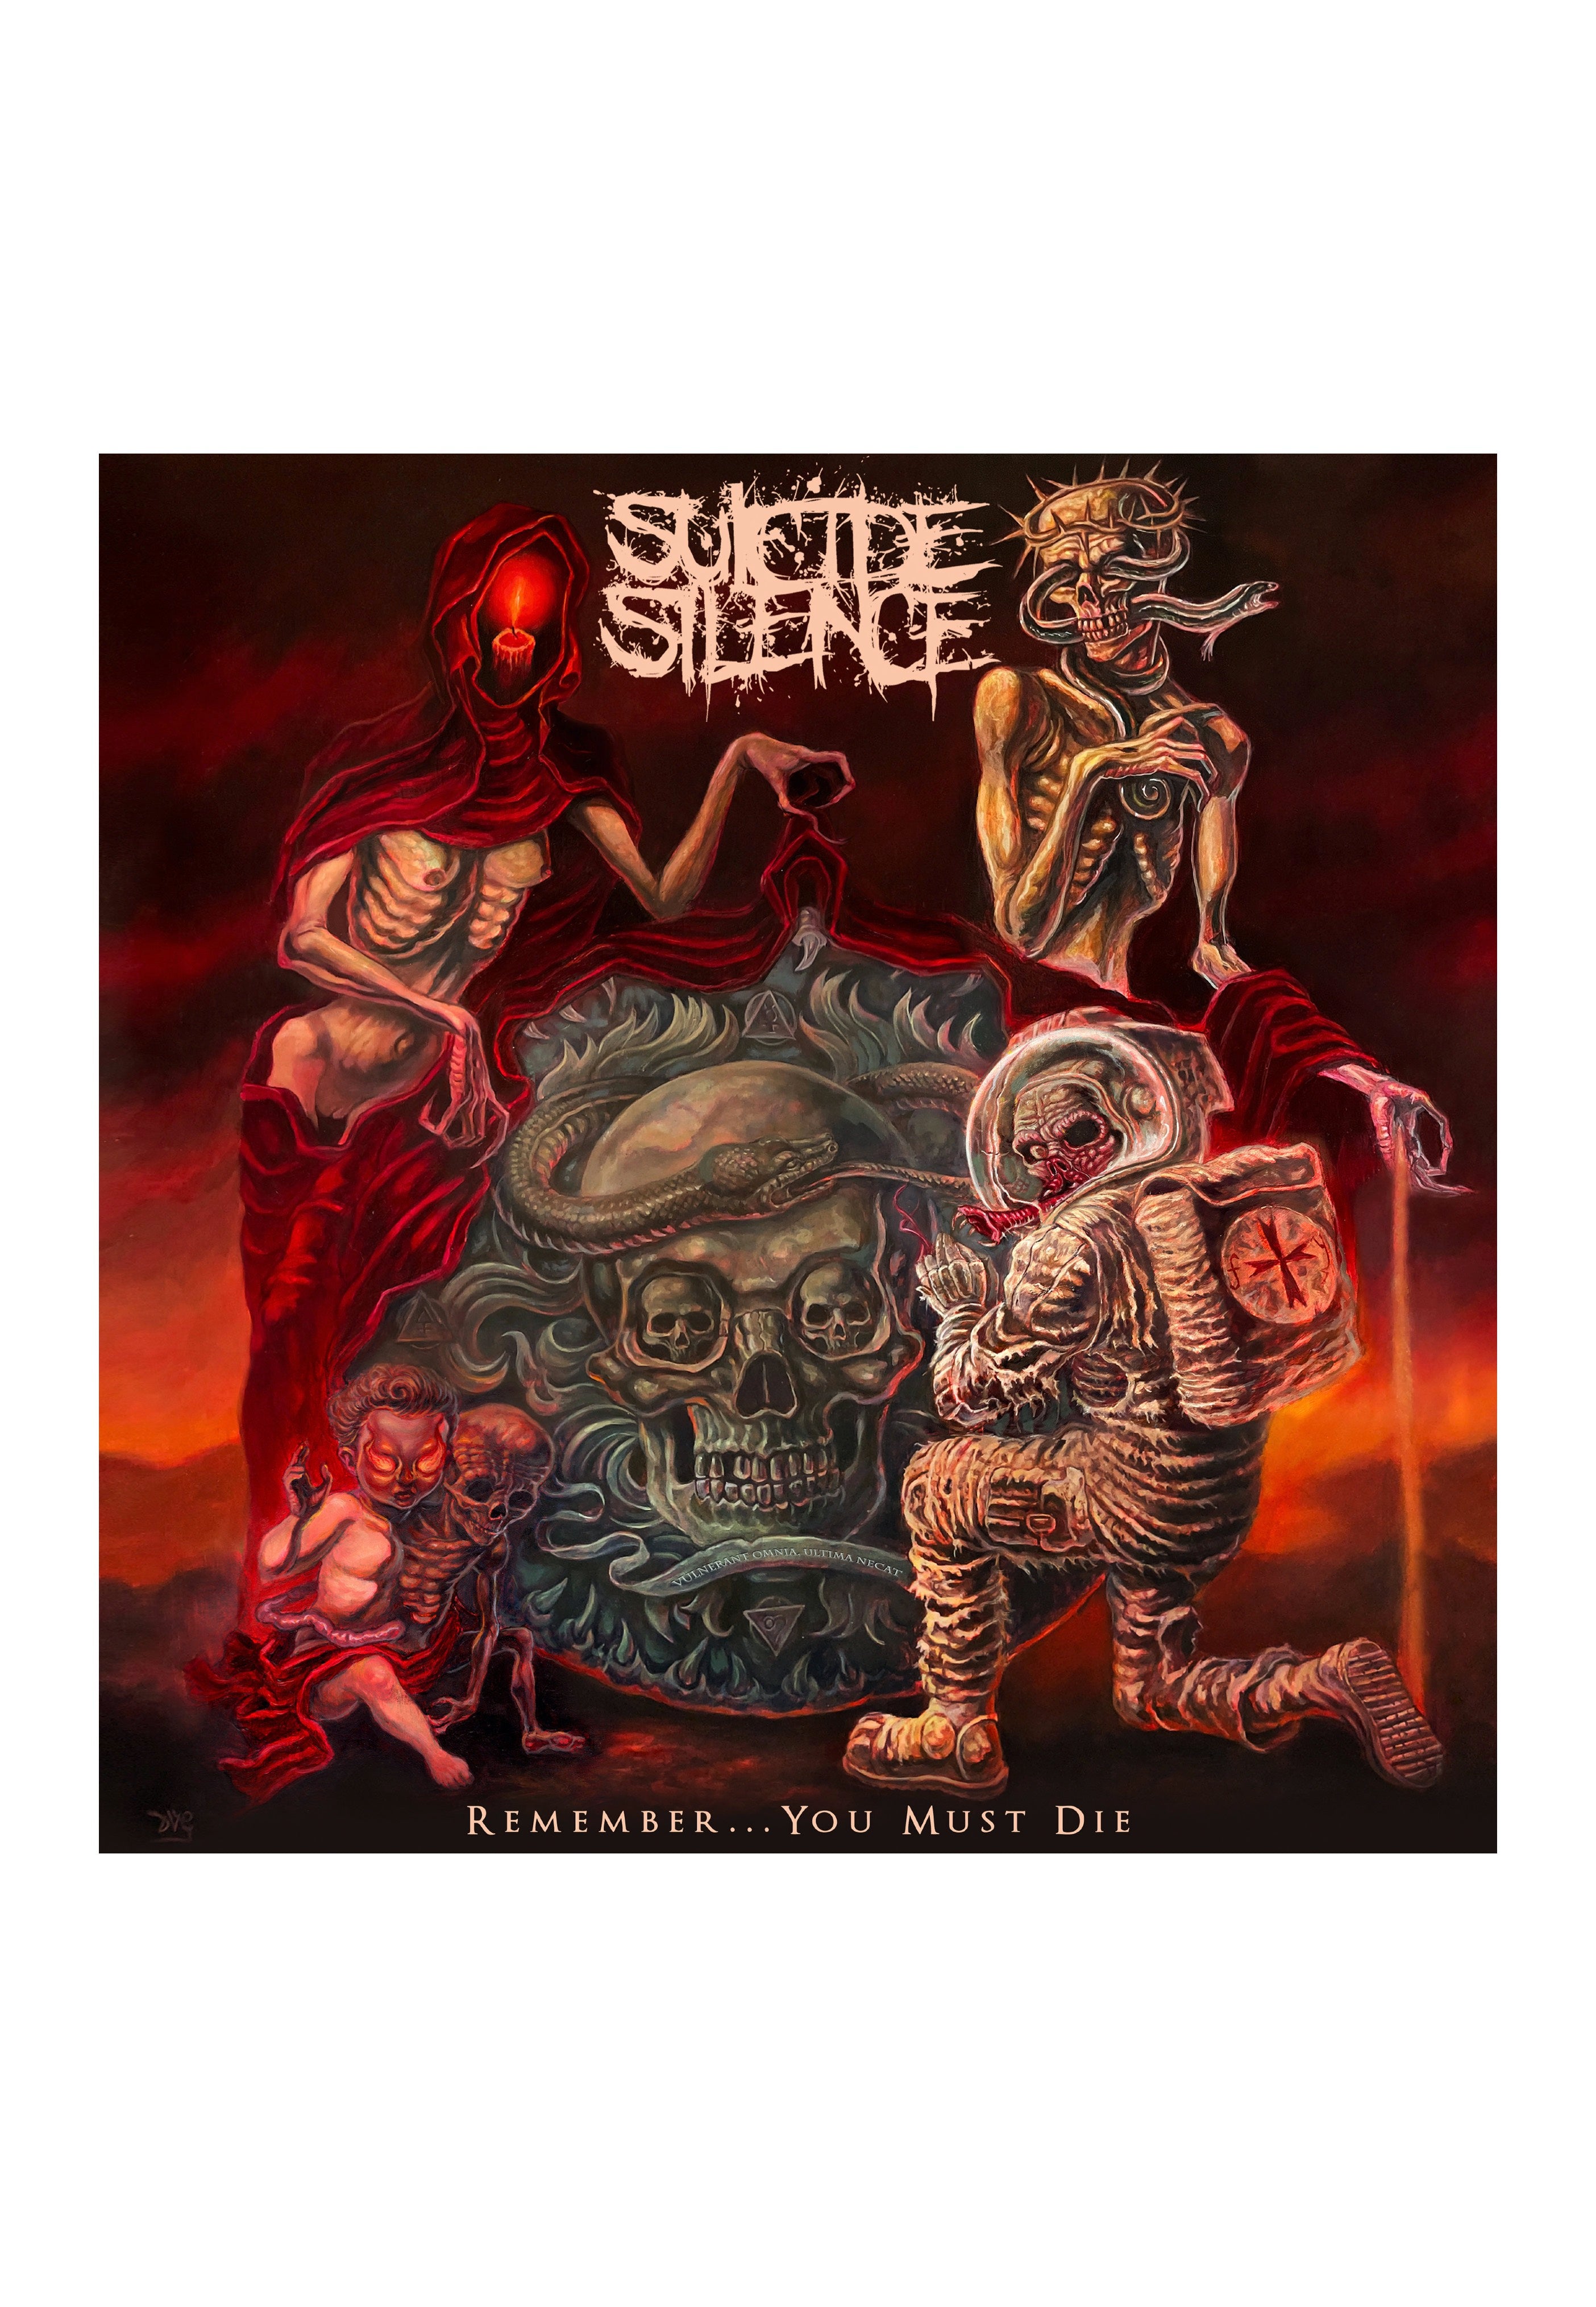 Suicide Silence - Remember... You Must Die Ltd. Deluxe - Digipak CD + Coin